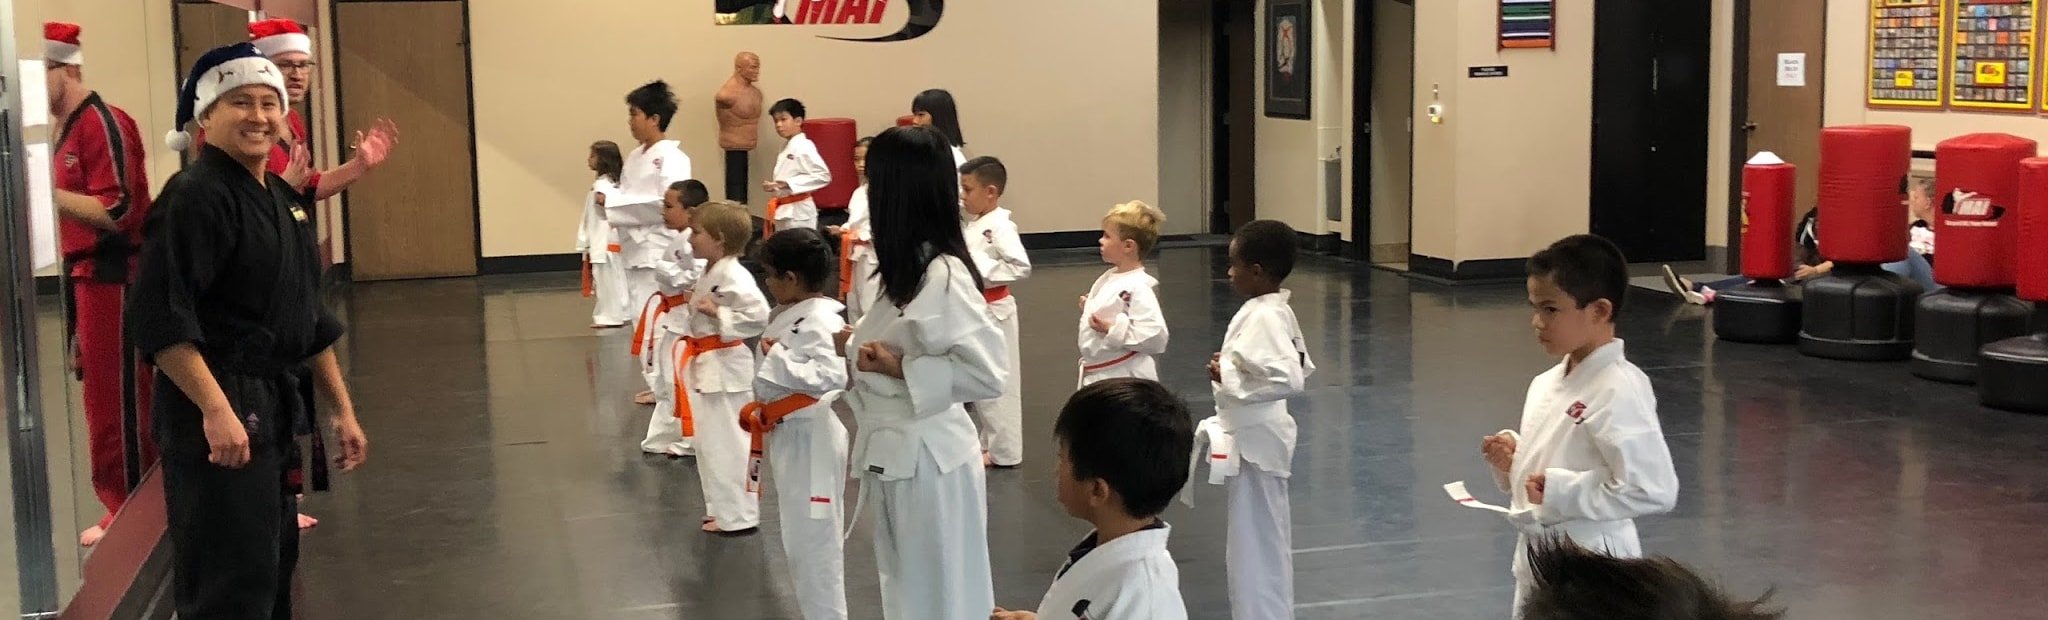 Christmas Time With White And Orange Belts